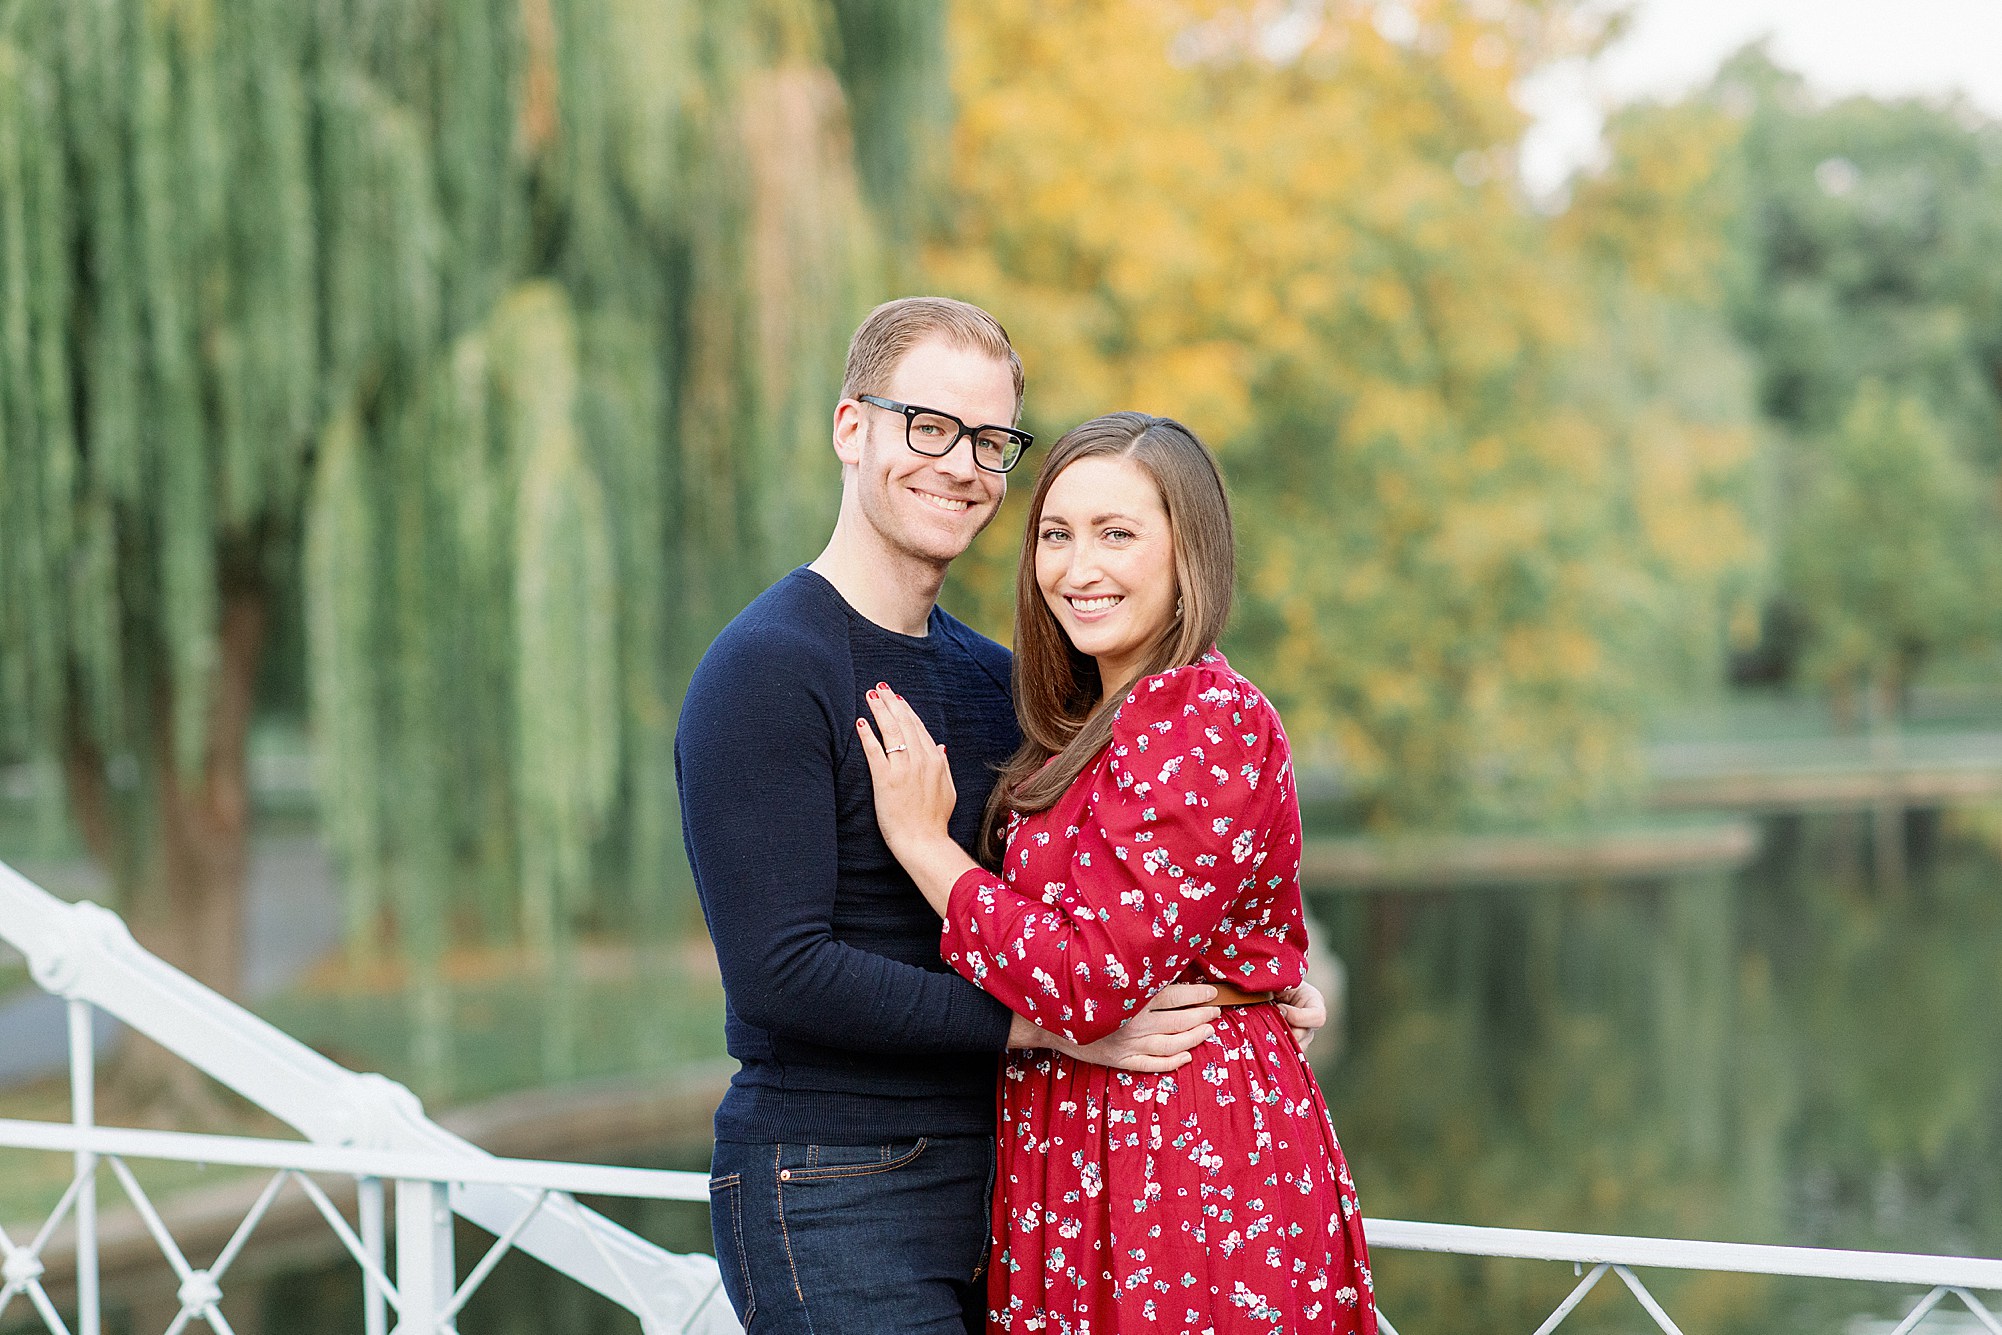 Boston Public Garden engagement session at sunrise Fall in New England